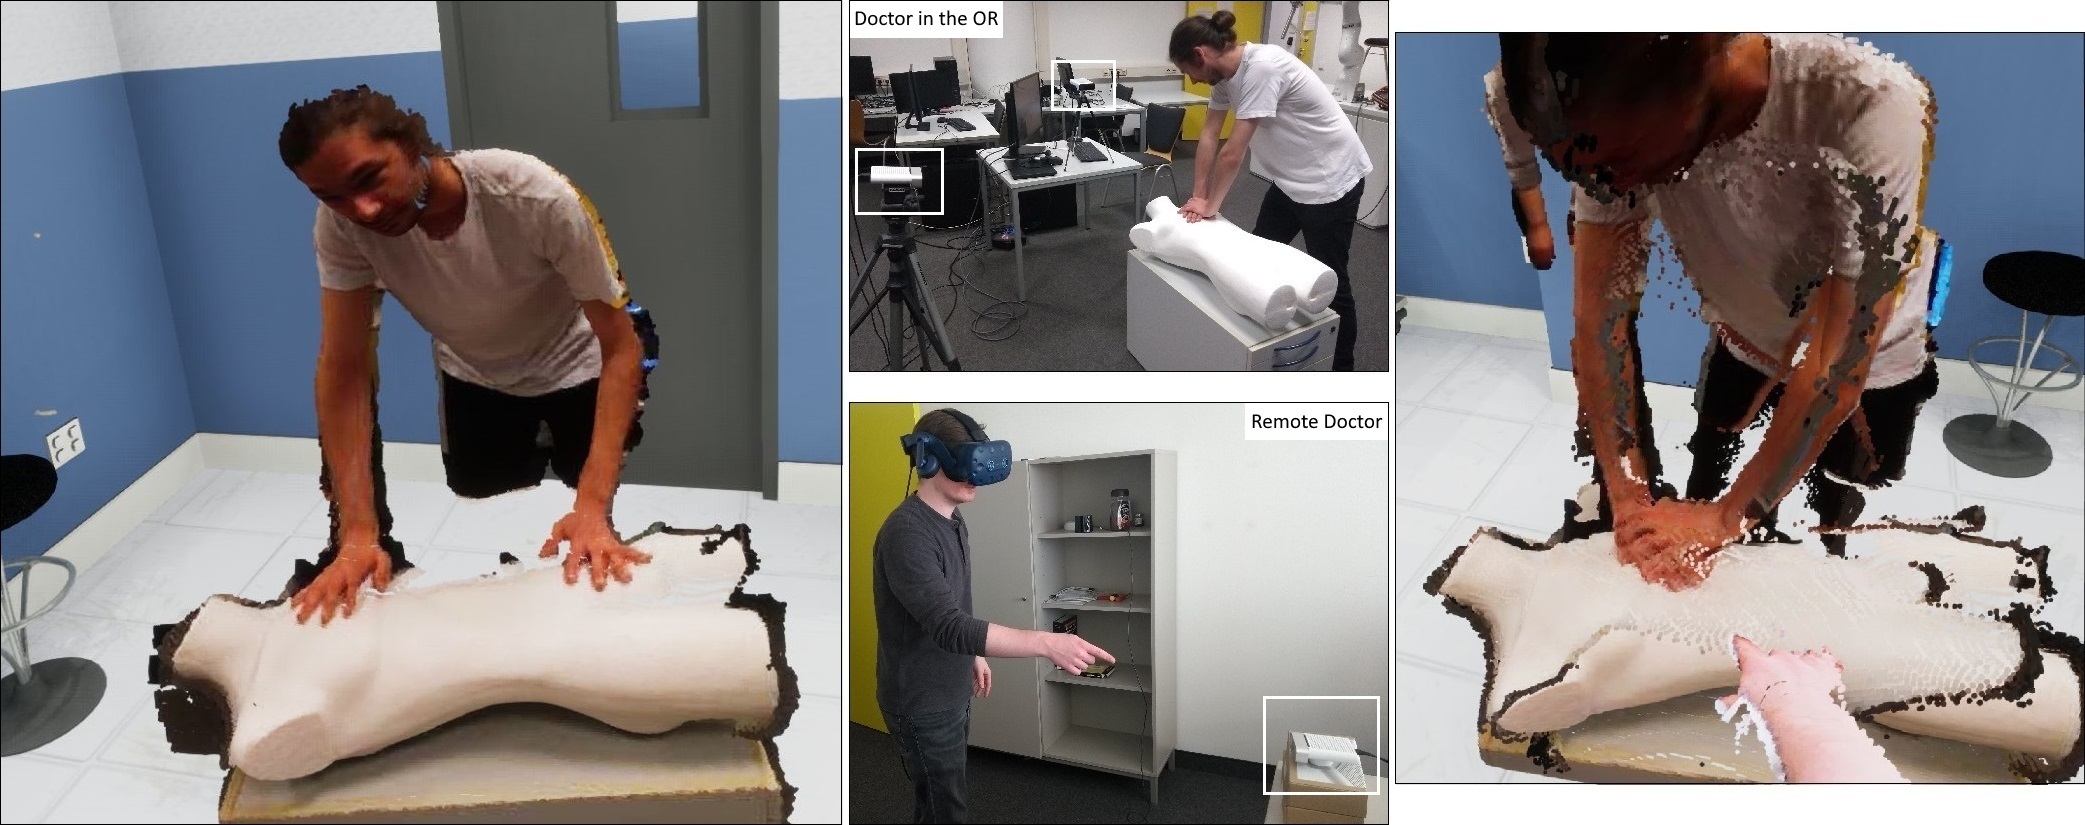 Evaluation of Point Cloud Streaming and Rendering for VR-based Telepresence in the OR